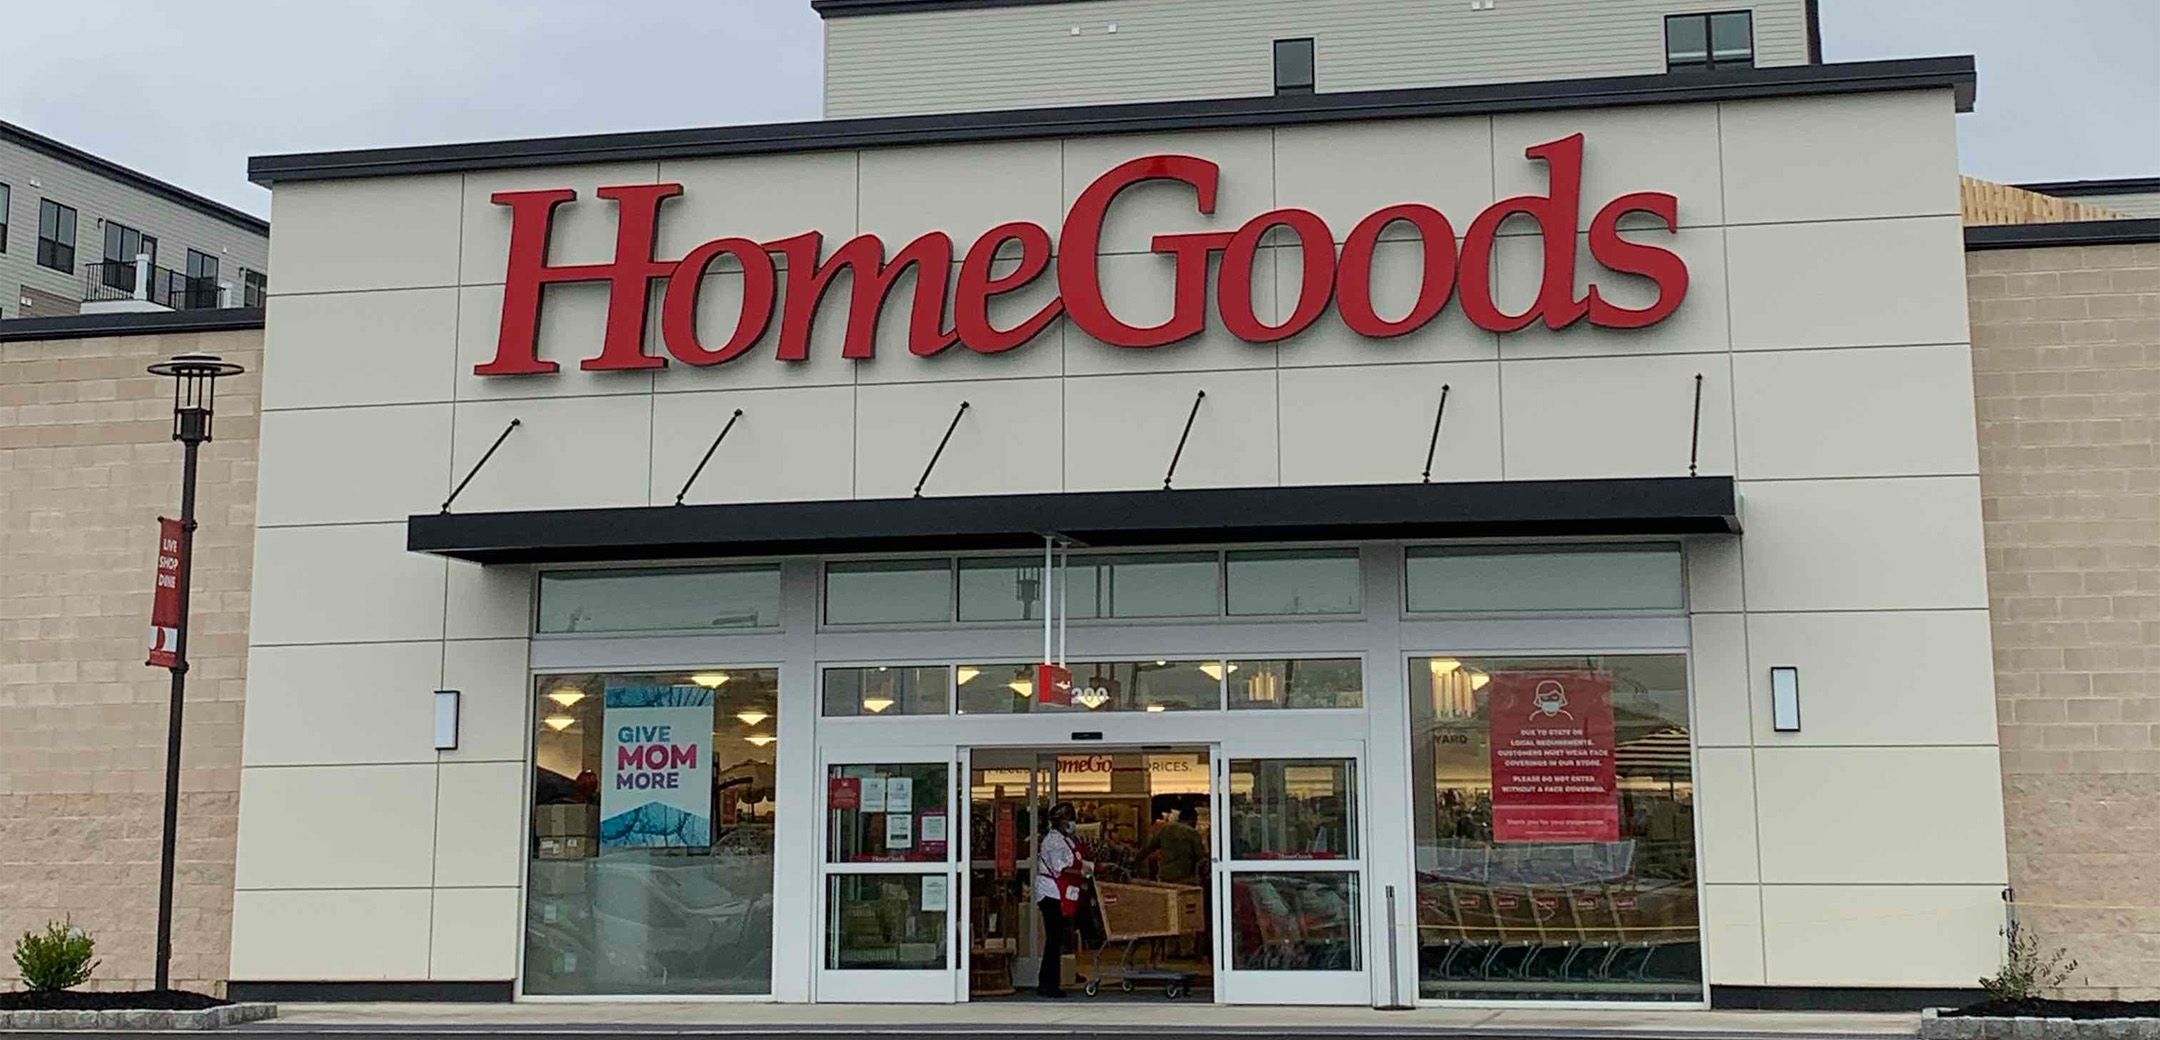 The exterior of the Homegoods building showcasing the brick and concrete slab design with red "HomeGoods" signage above the automatic front doors and driveway.